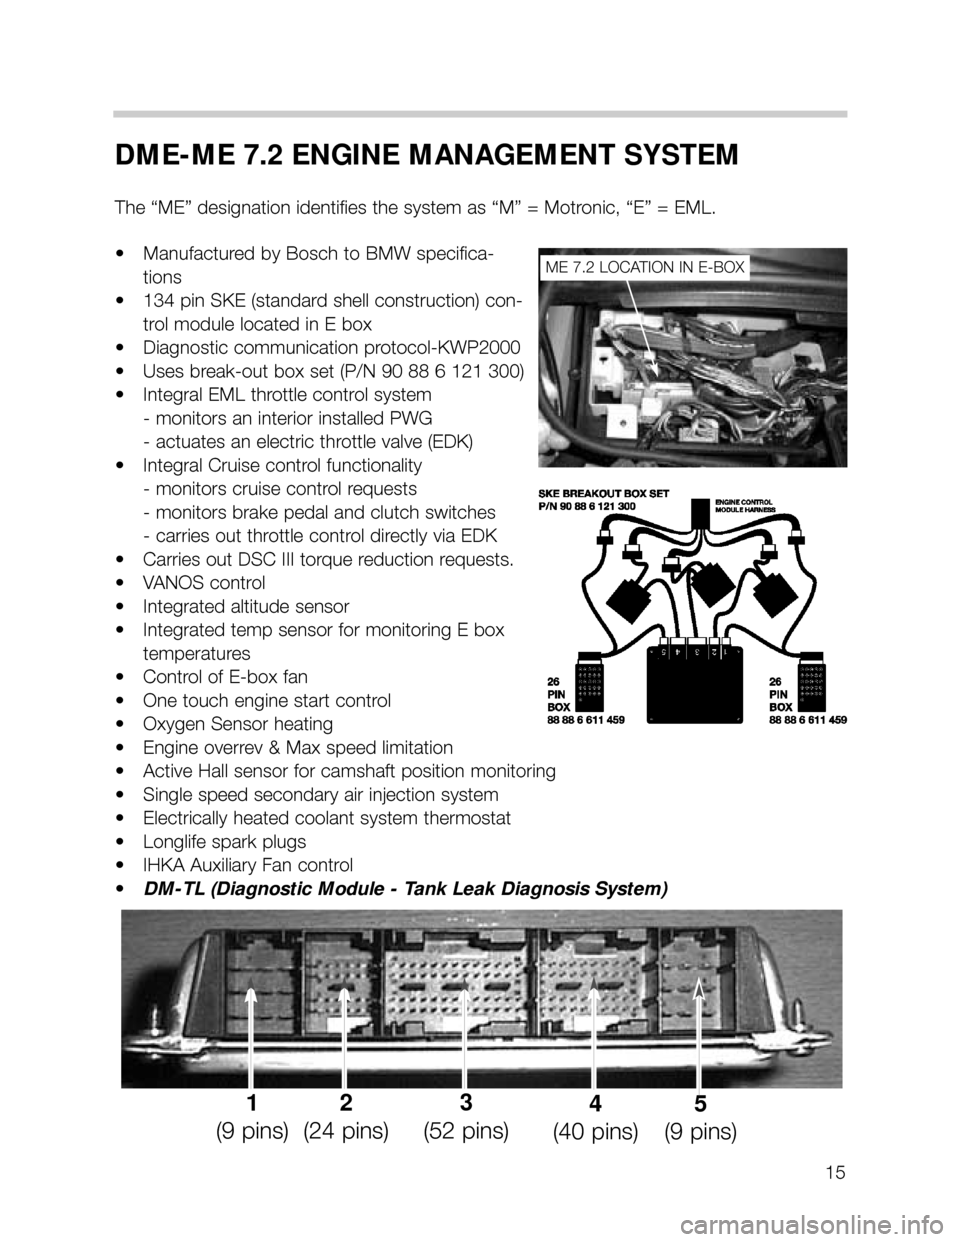 BMW 540i 2001 E39 M62TU Engine Workshop Manual 15
DME-ME 7.2 ENGINE MANAGEMENT SYSTEM
The “ME” designation identifies the system as “M” = Motronic, “E” = EML.
• Manufactured by Bosch to BMW specifica-
tions
• 134 pin SKE (standard 